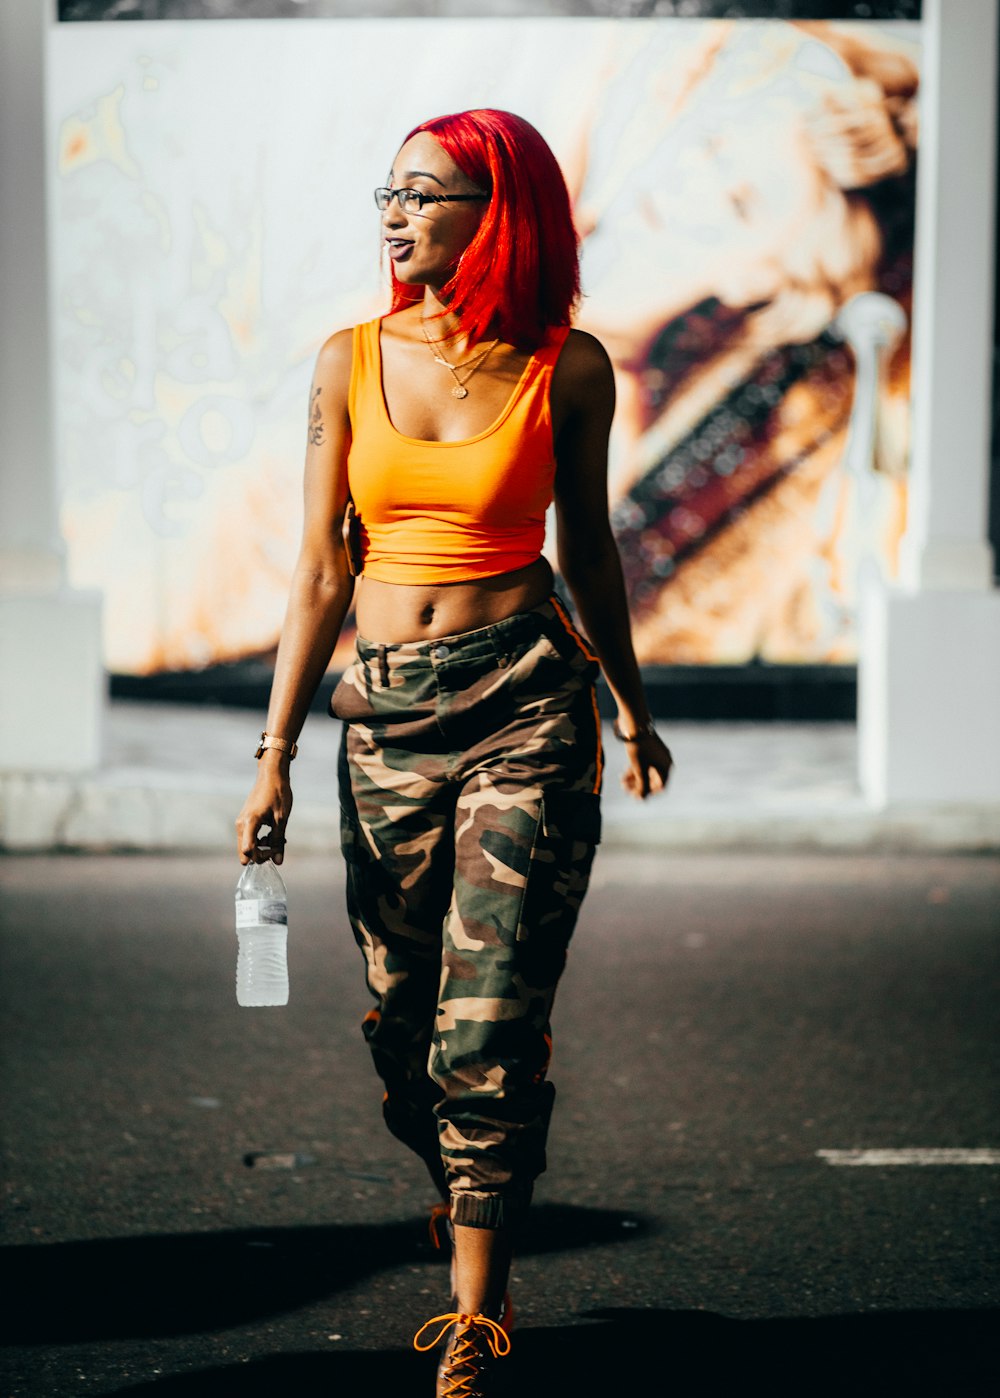 woman in orange tank top and camouflage pants standing on road during daytime